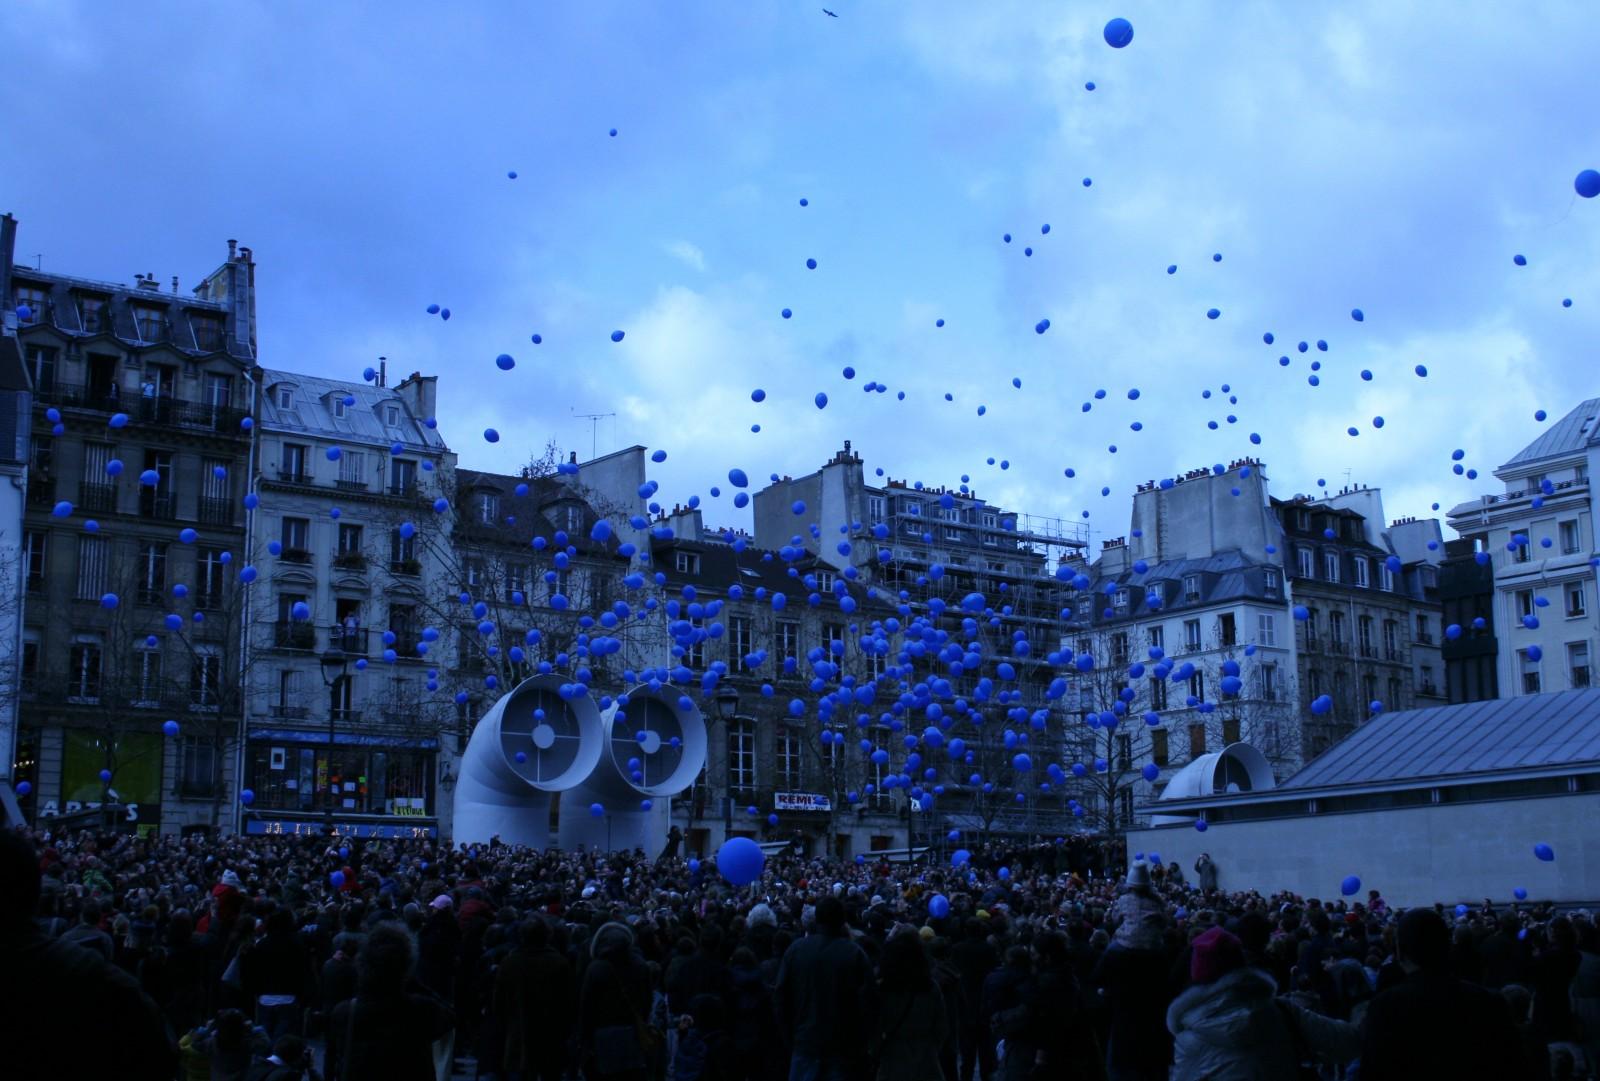 View of the release of balloon during the exhibition,"Yves Klein Corps, couleur, immatériel", Centre Georges Pompidou, 2007